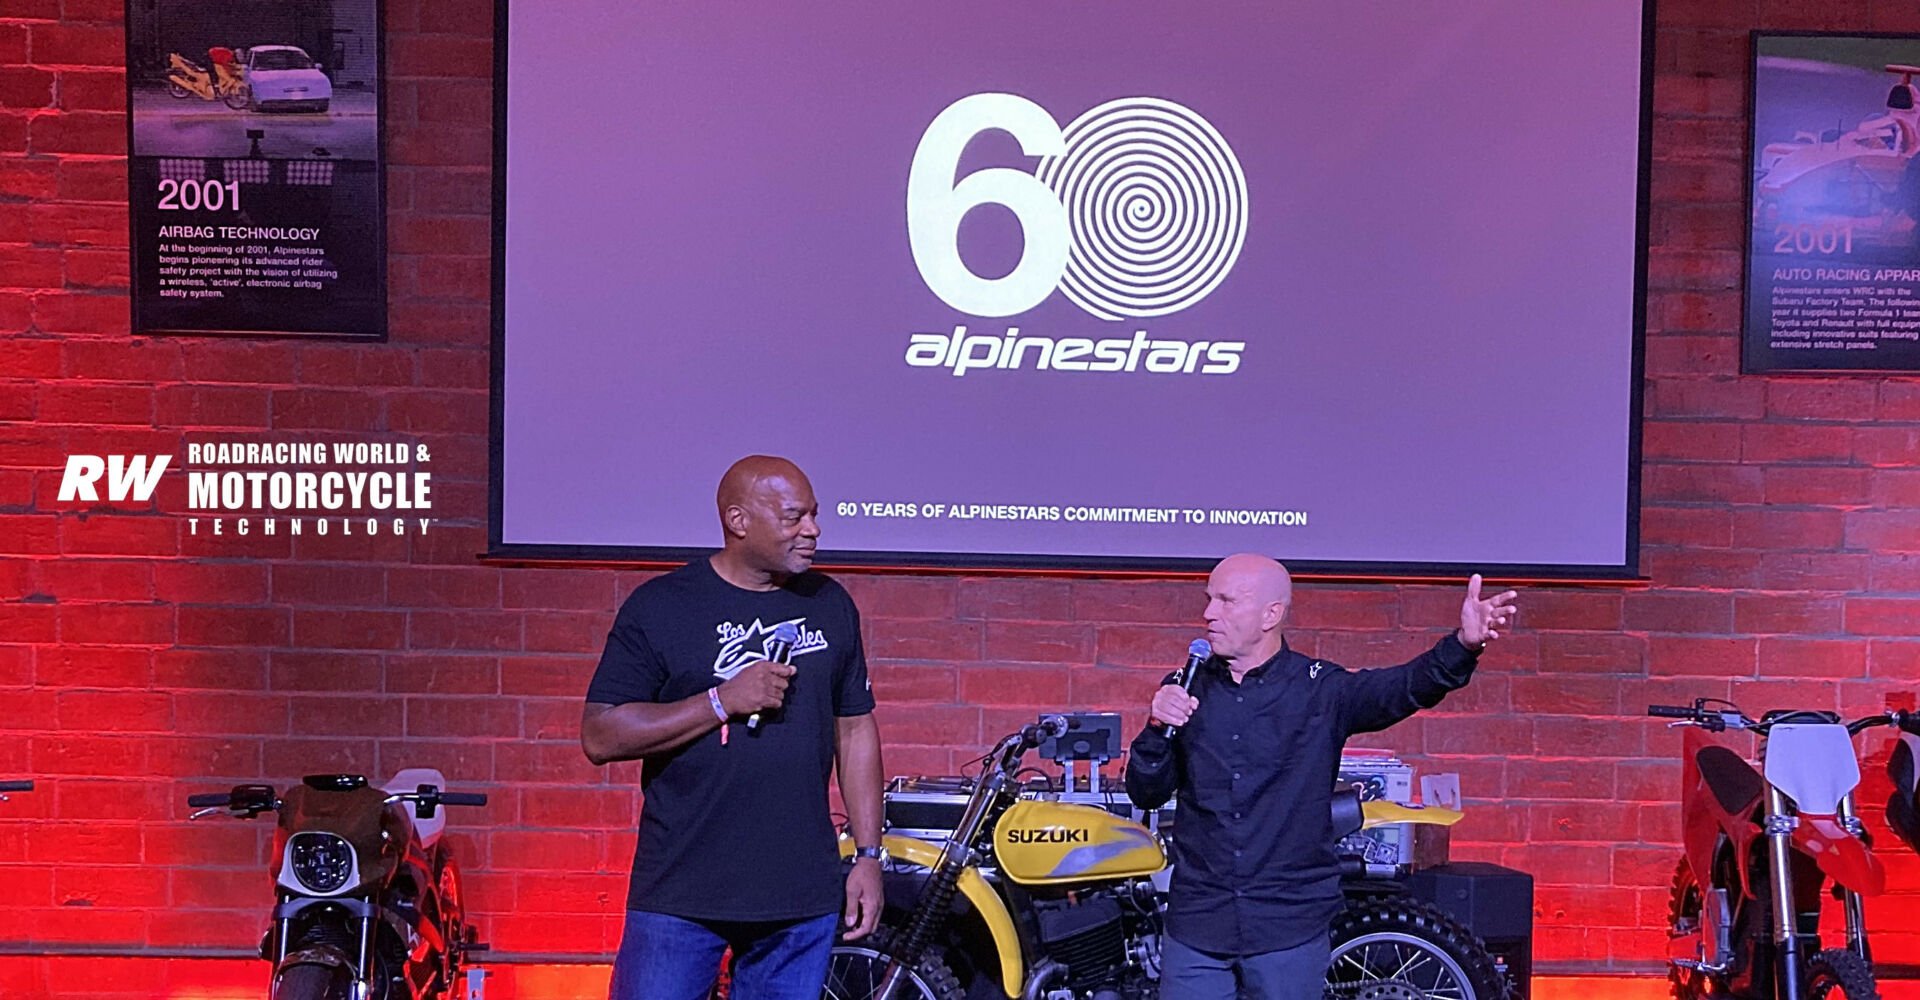 Comedian and actor Alonzo Bodden (left) and MotoGP Legend Randy Mamola (right) were the masters of ceremonies for the Alpinestars 60th anniversary celebration in downtown Los Angeles. Note the poster in the upper left corner, which commemorates the beginning of the company's work on inflatable rider protection. Airbags now are required protective gear at the international racing level. Photo by Michael Gougis.